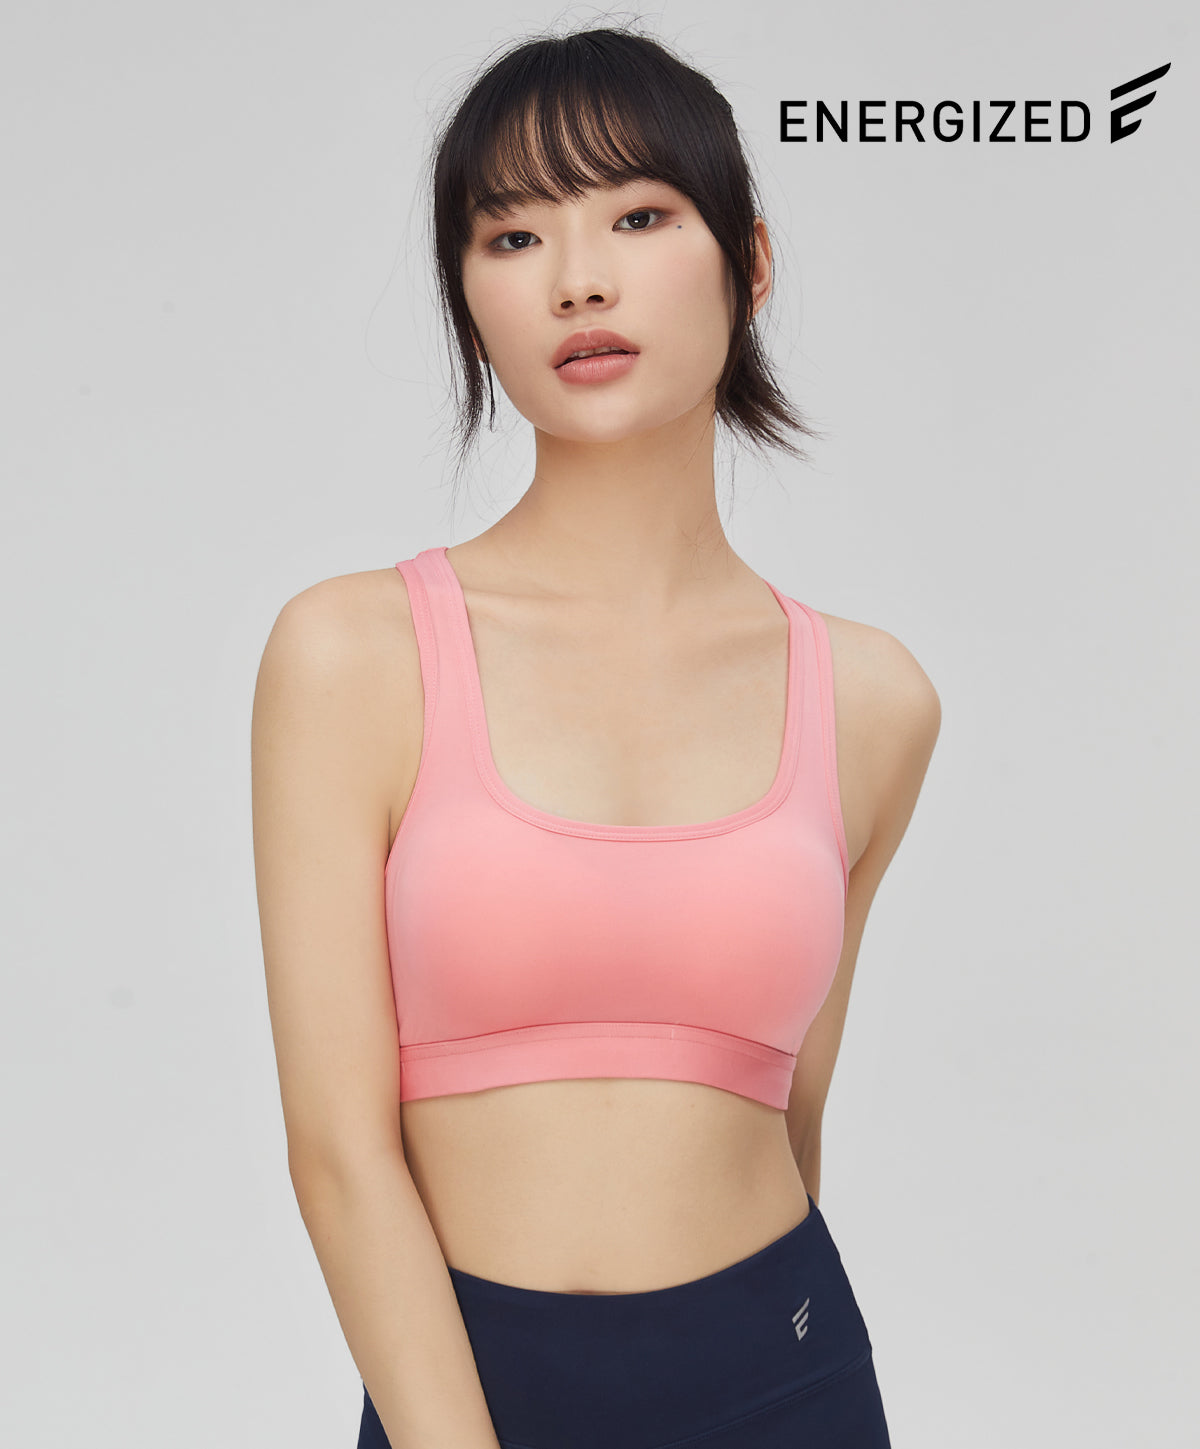 Pierre Cardin Lingerie Singapore - Energized sports bra -- designed for  comfort and impact reduction. Promotion now on! Get a FREE Energized hyper  quart sports pants worth $39!